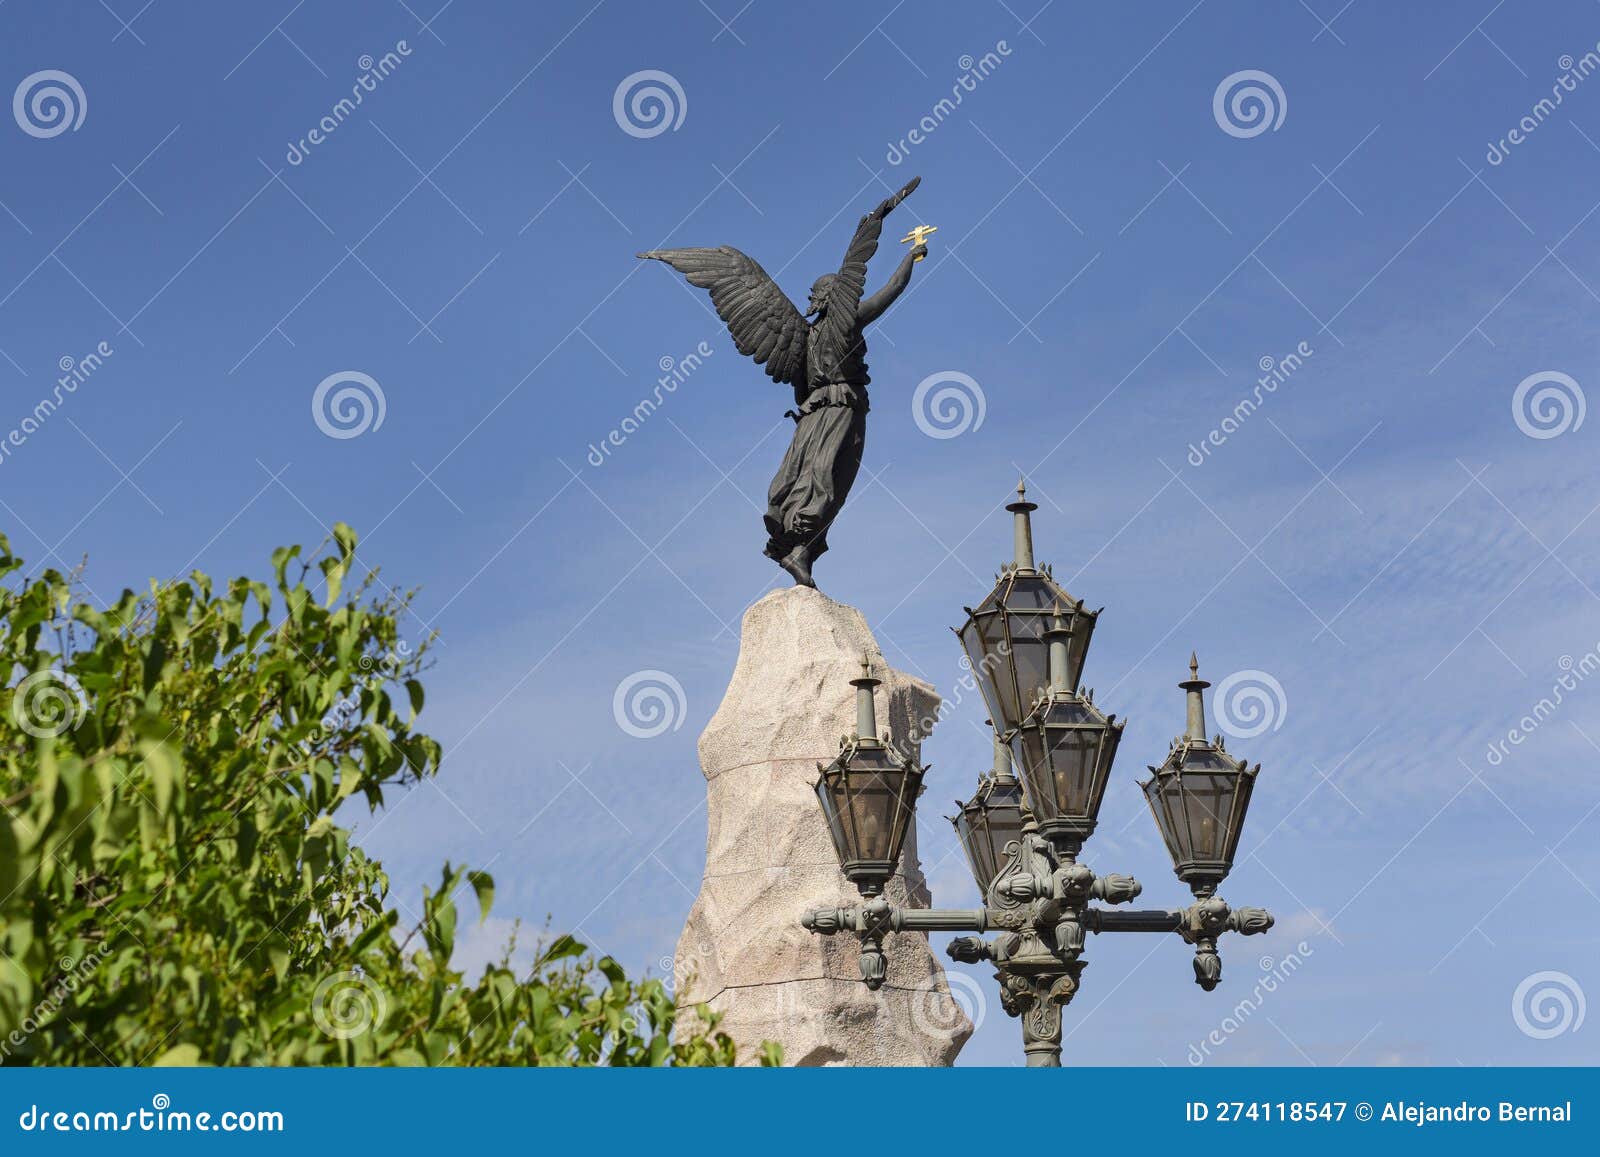 bronce angel sculpture of russalka monument with blue sky at background